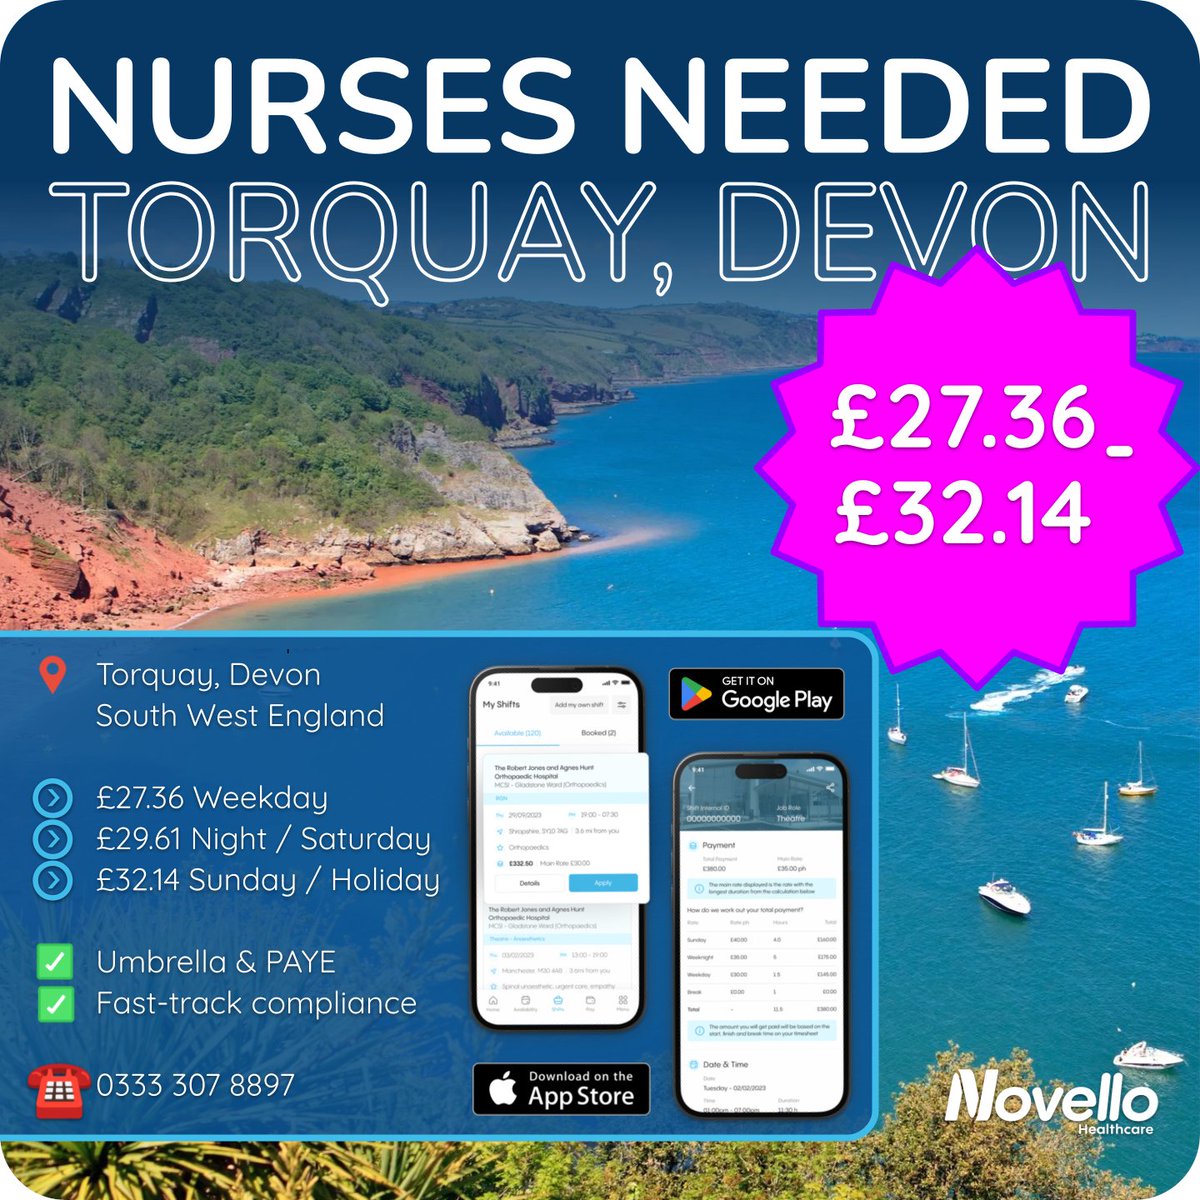 💥 NURSES NEEDED IN DEVON 🚀

Visit our website to read more / call for more info!

bit.ly/3xHQw5Z
 
#nursejobs #rgnjobs